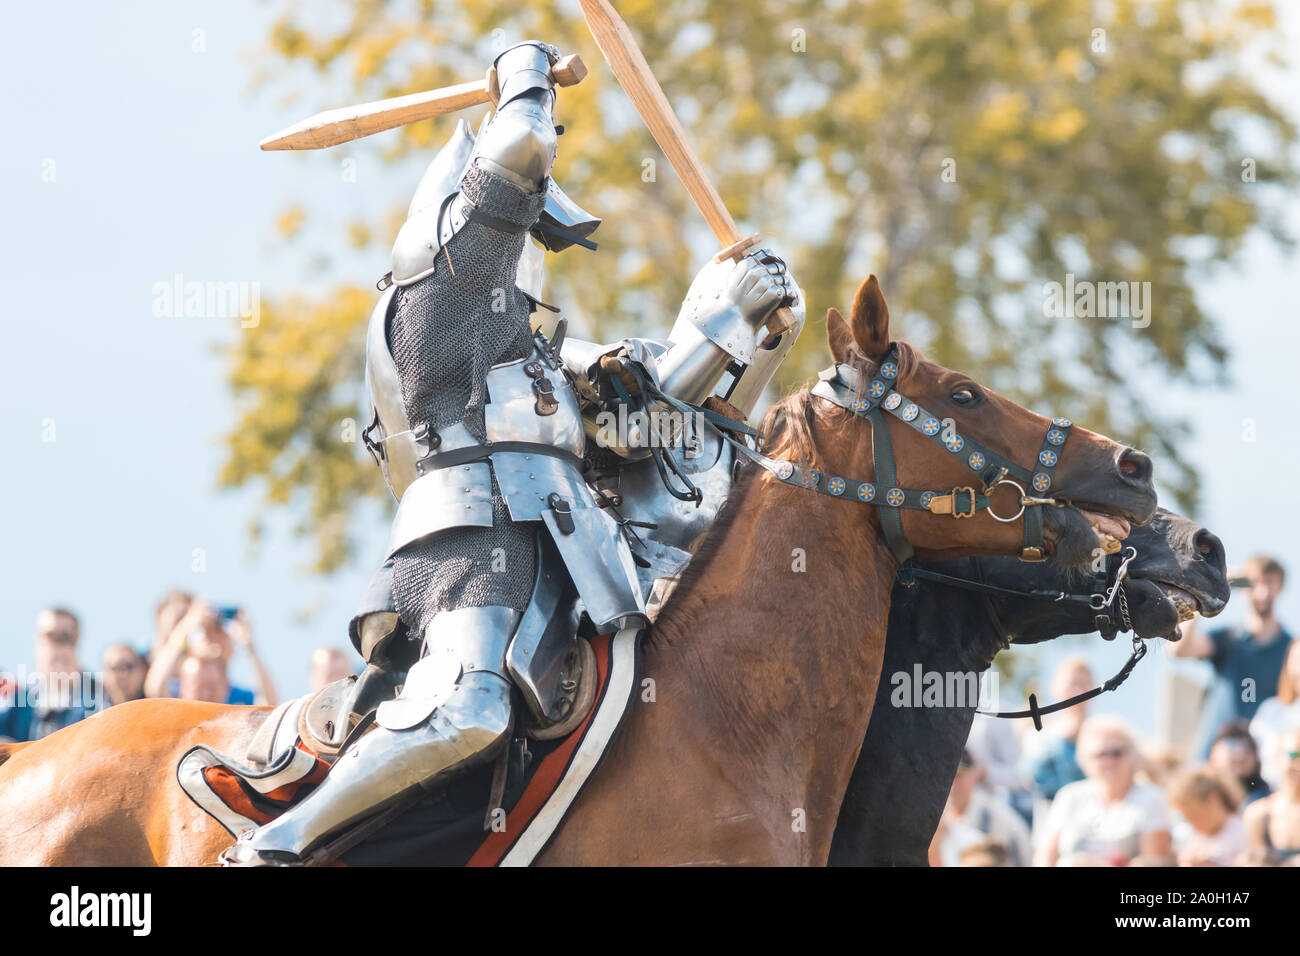 BULGAR, RUSSIA 11-08-2019: Knights having a fight on the wooden swords Stock Photo